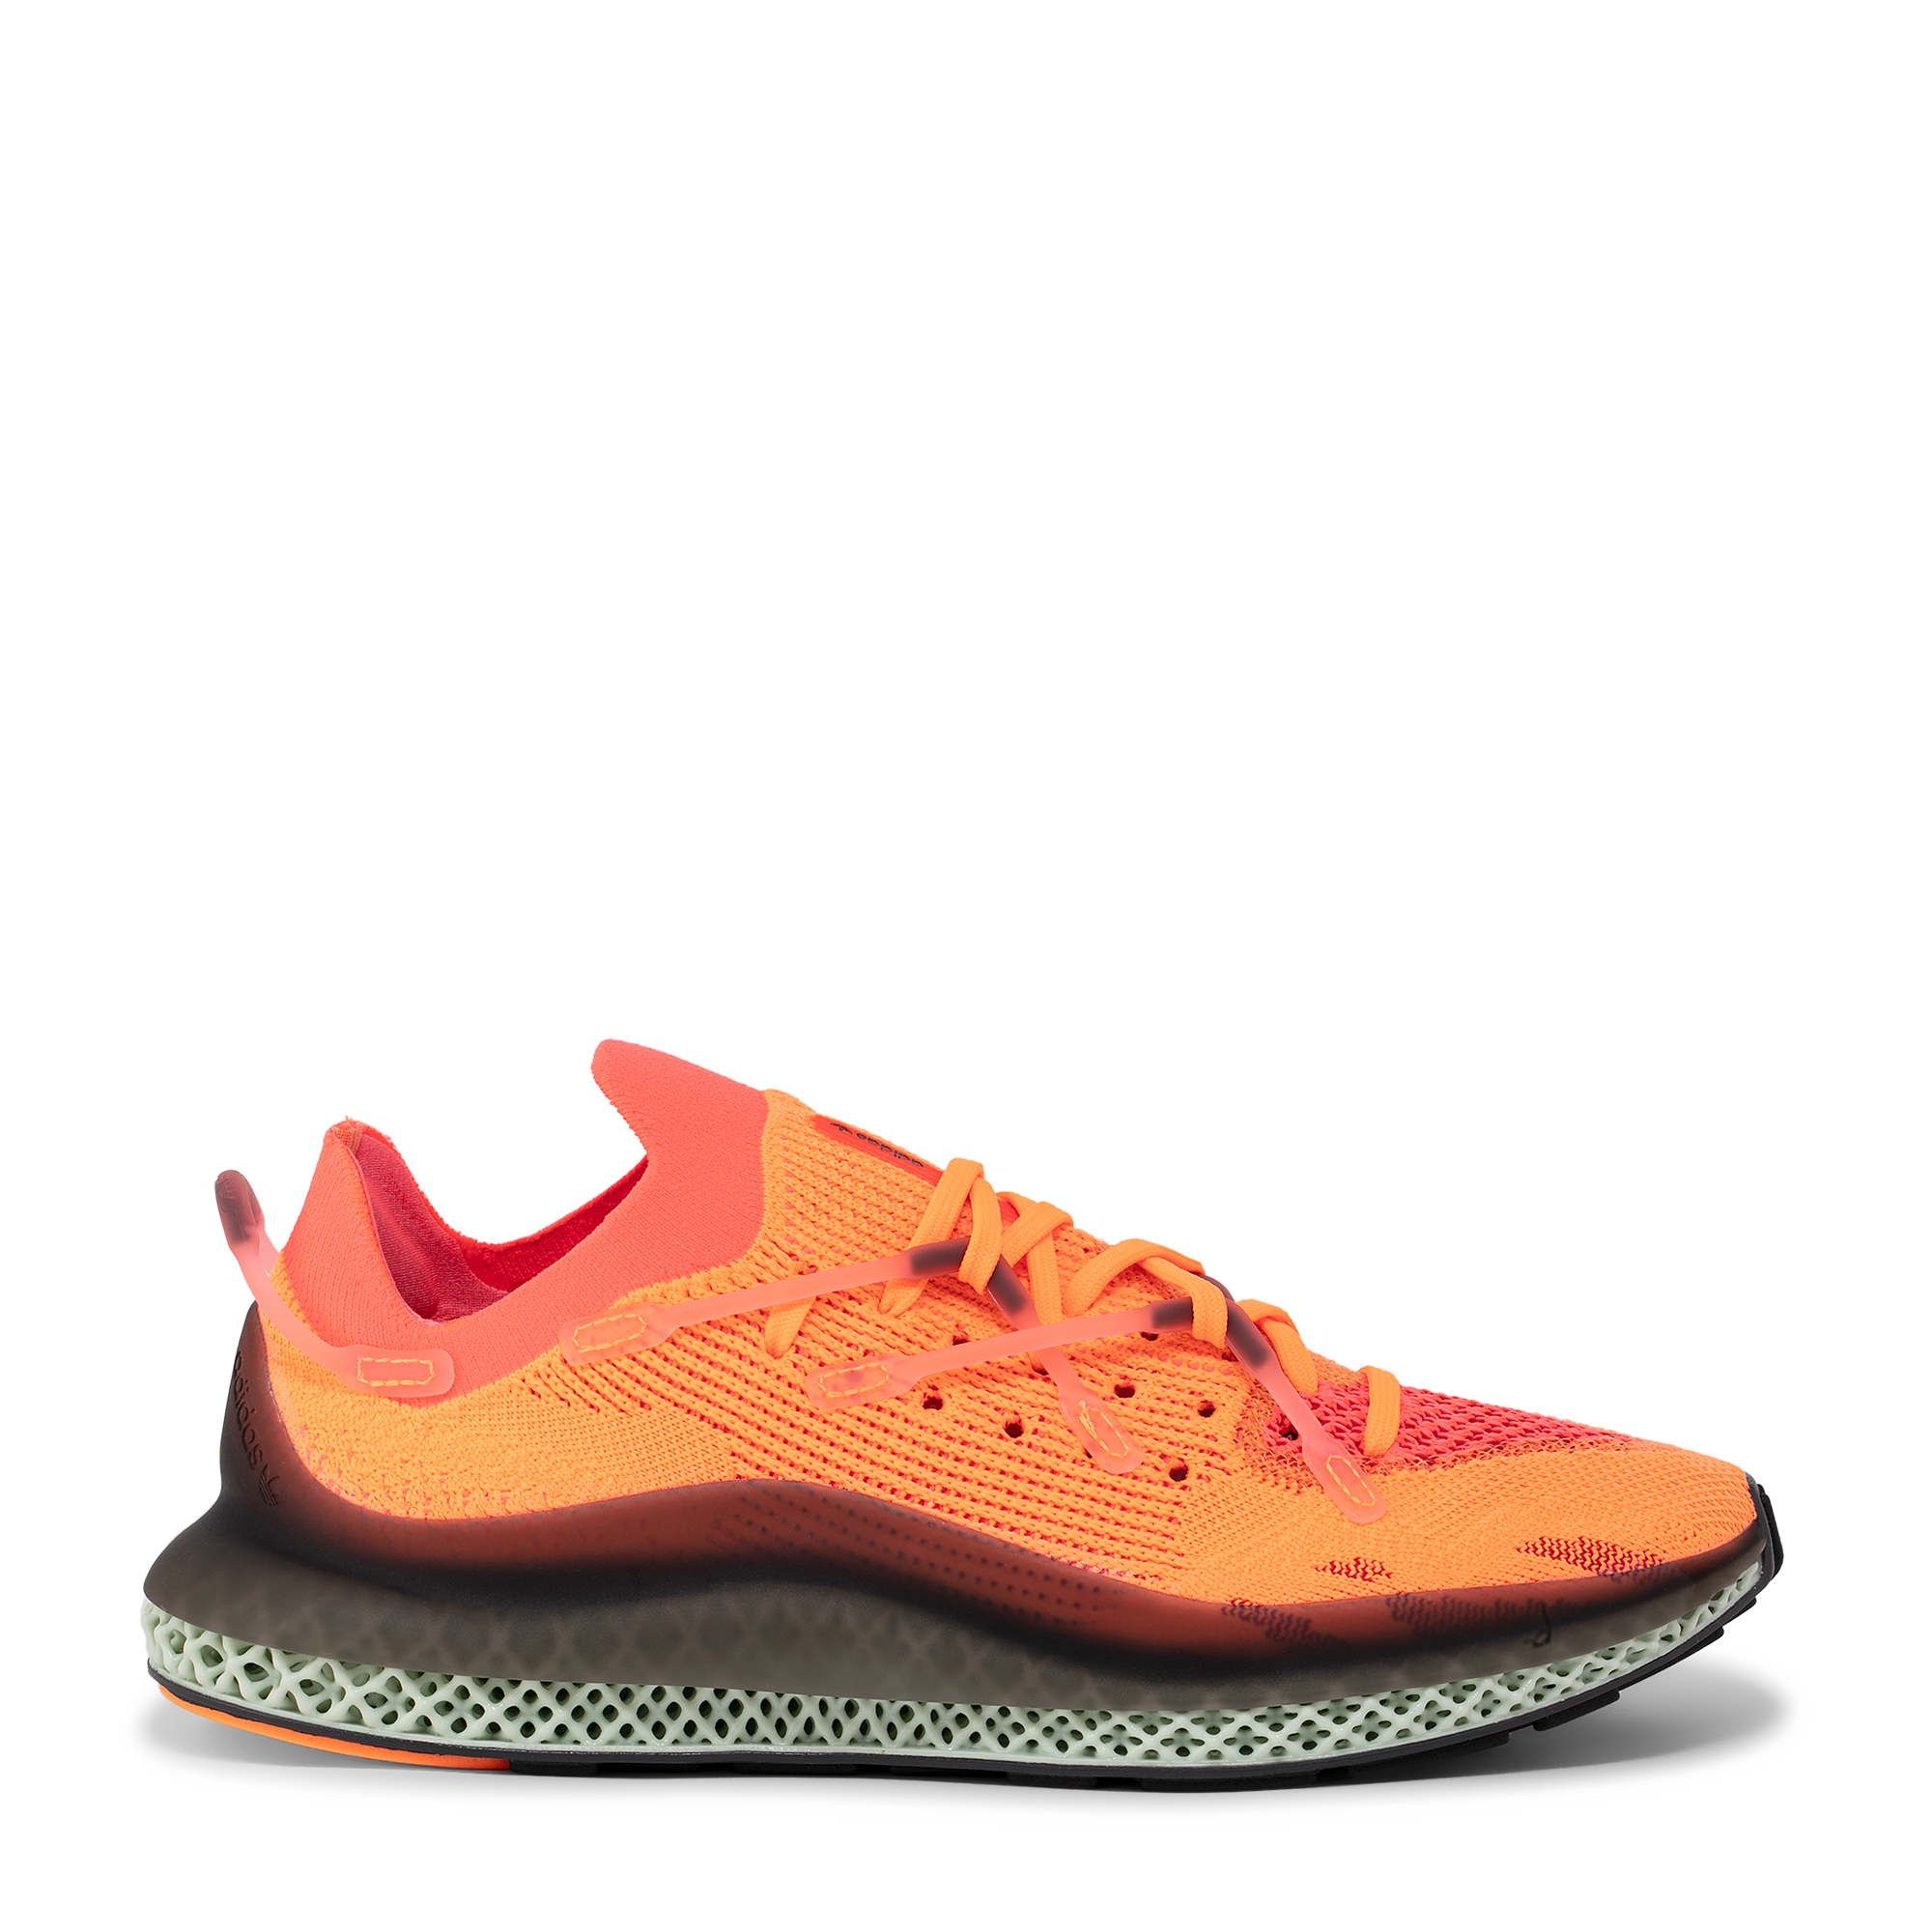 Adidas 4D Fusio sneakers for Men - Multicolored in KSA | Level Shoes